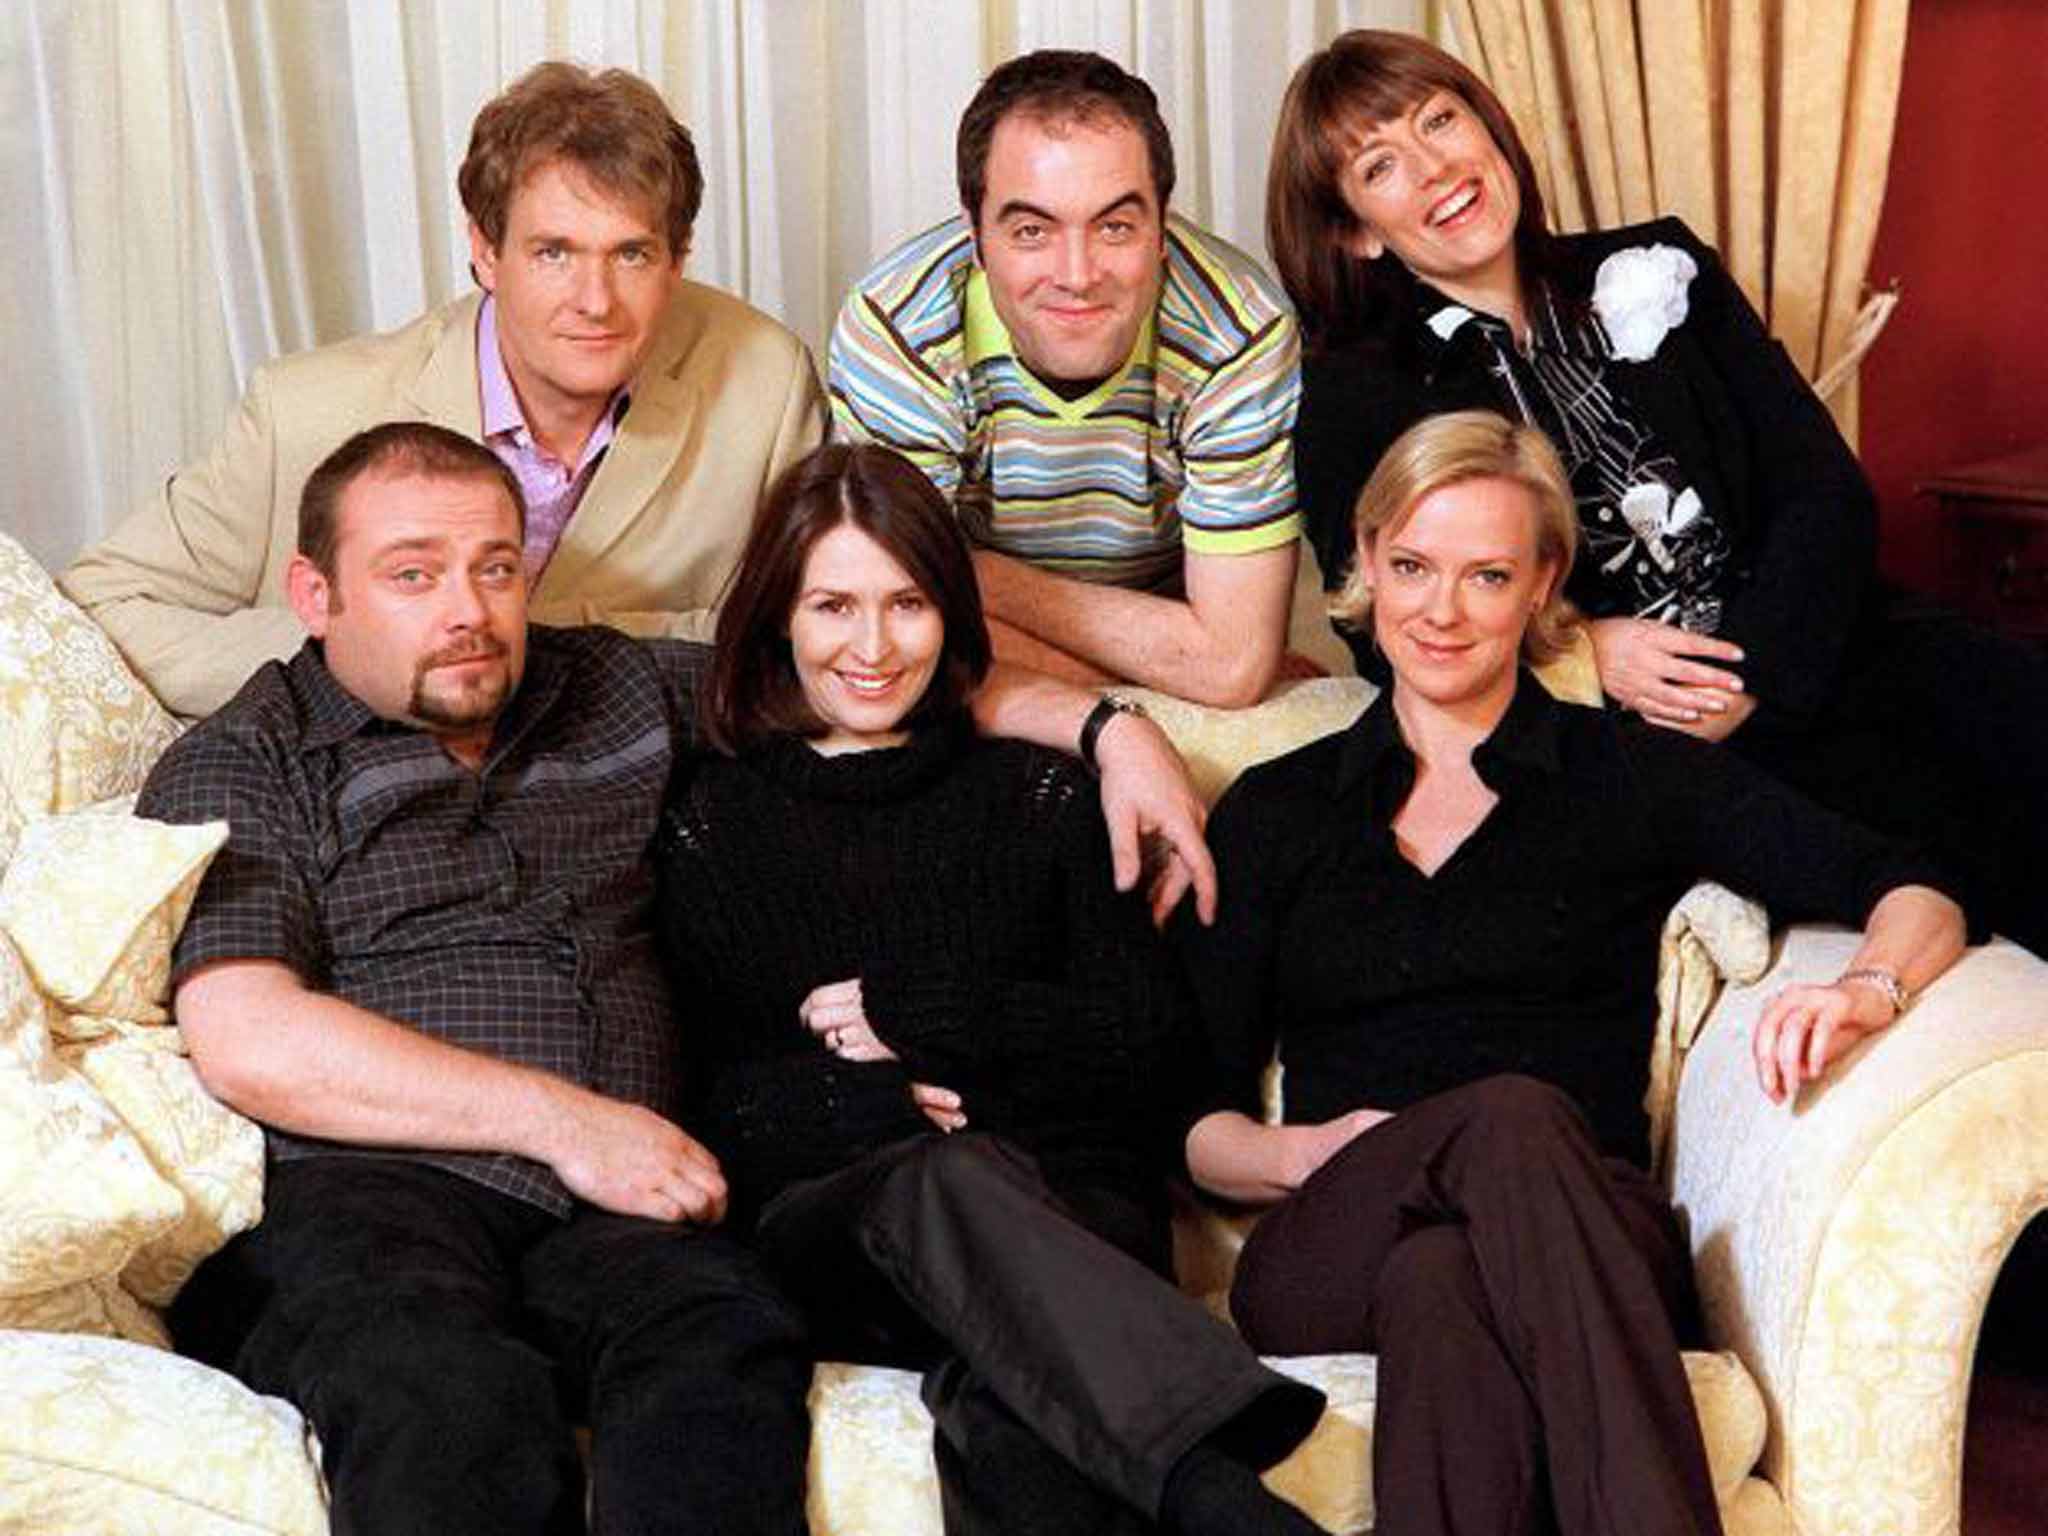 Cold Feet' is a sitcom that belongs in the past: This is a time of